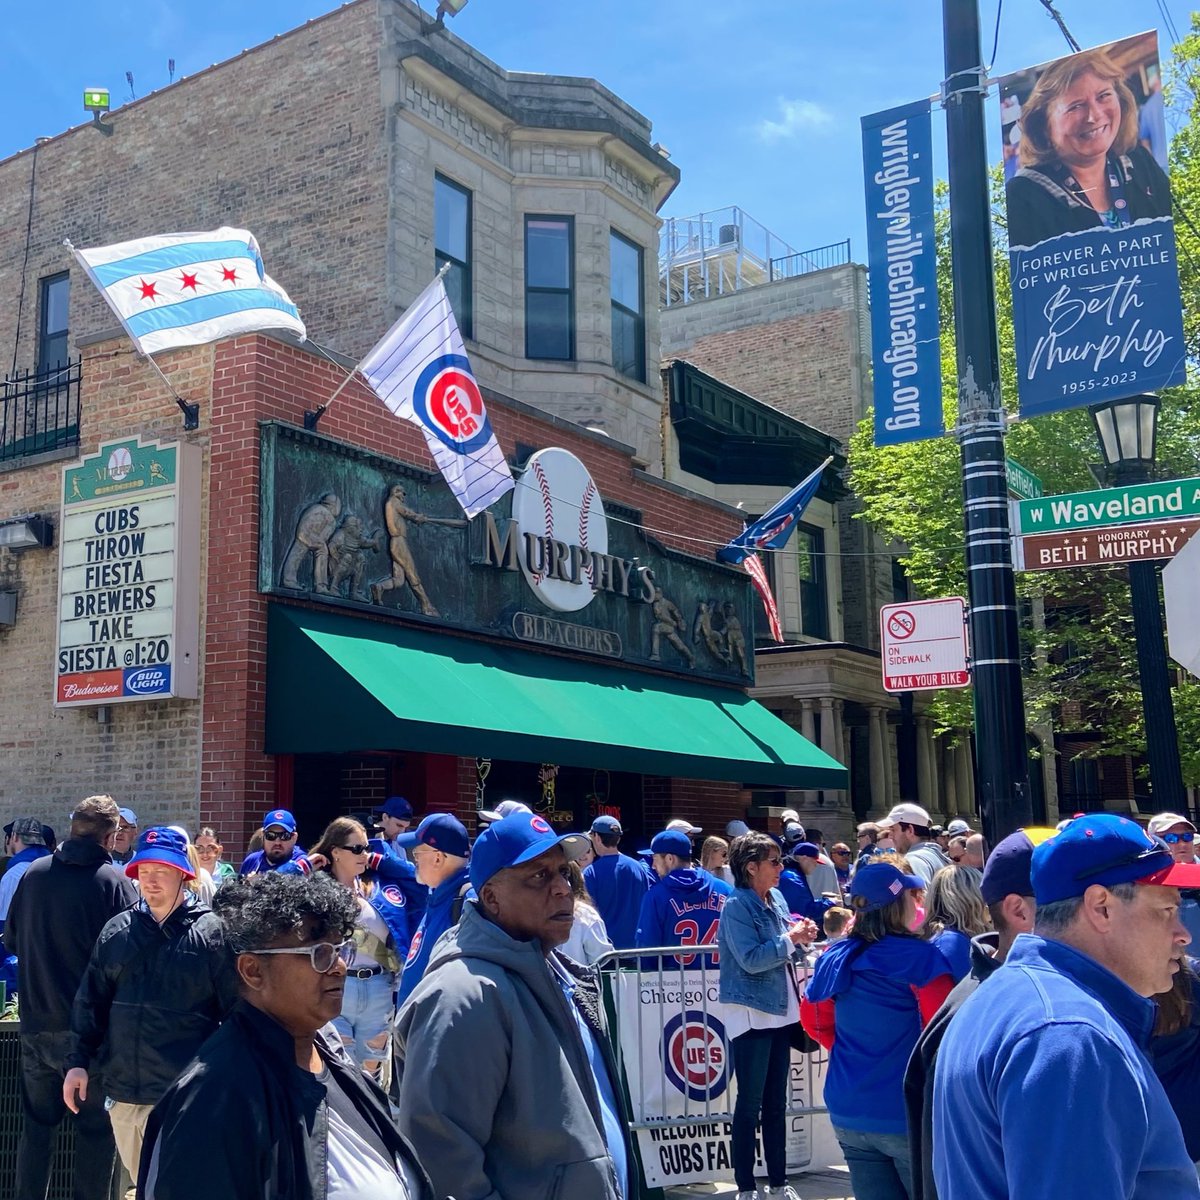 The fiesta has spilled over to our corner of Waveland and Sheffield. It’s a party all day long 🍻 Happy Cinco de Mayo & Let’s Go Cubs! 🐻

#chicagocubs #chicagocubsbaseball #chicagocubsfan #chicagocubs🐻 #gocubs #cubs #cubsbaseball #wrigleyfield #murphysbleachers #cincodemayo